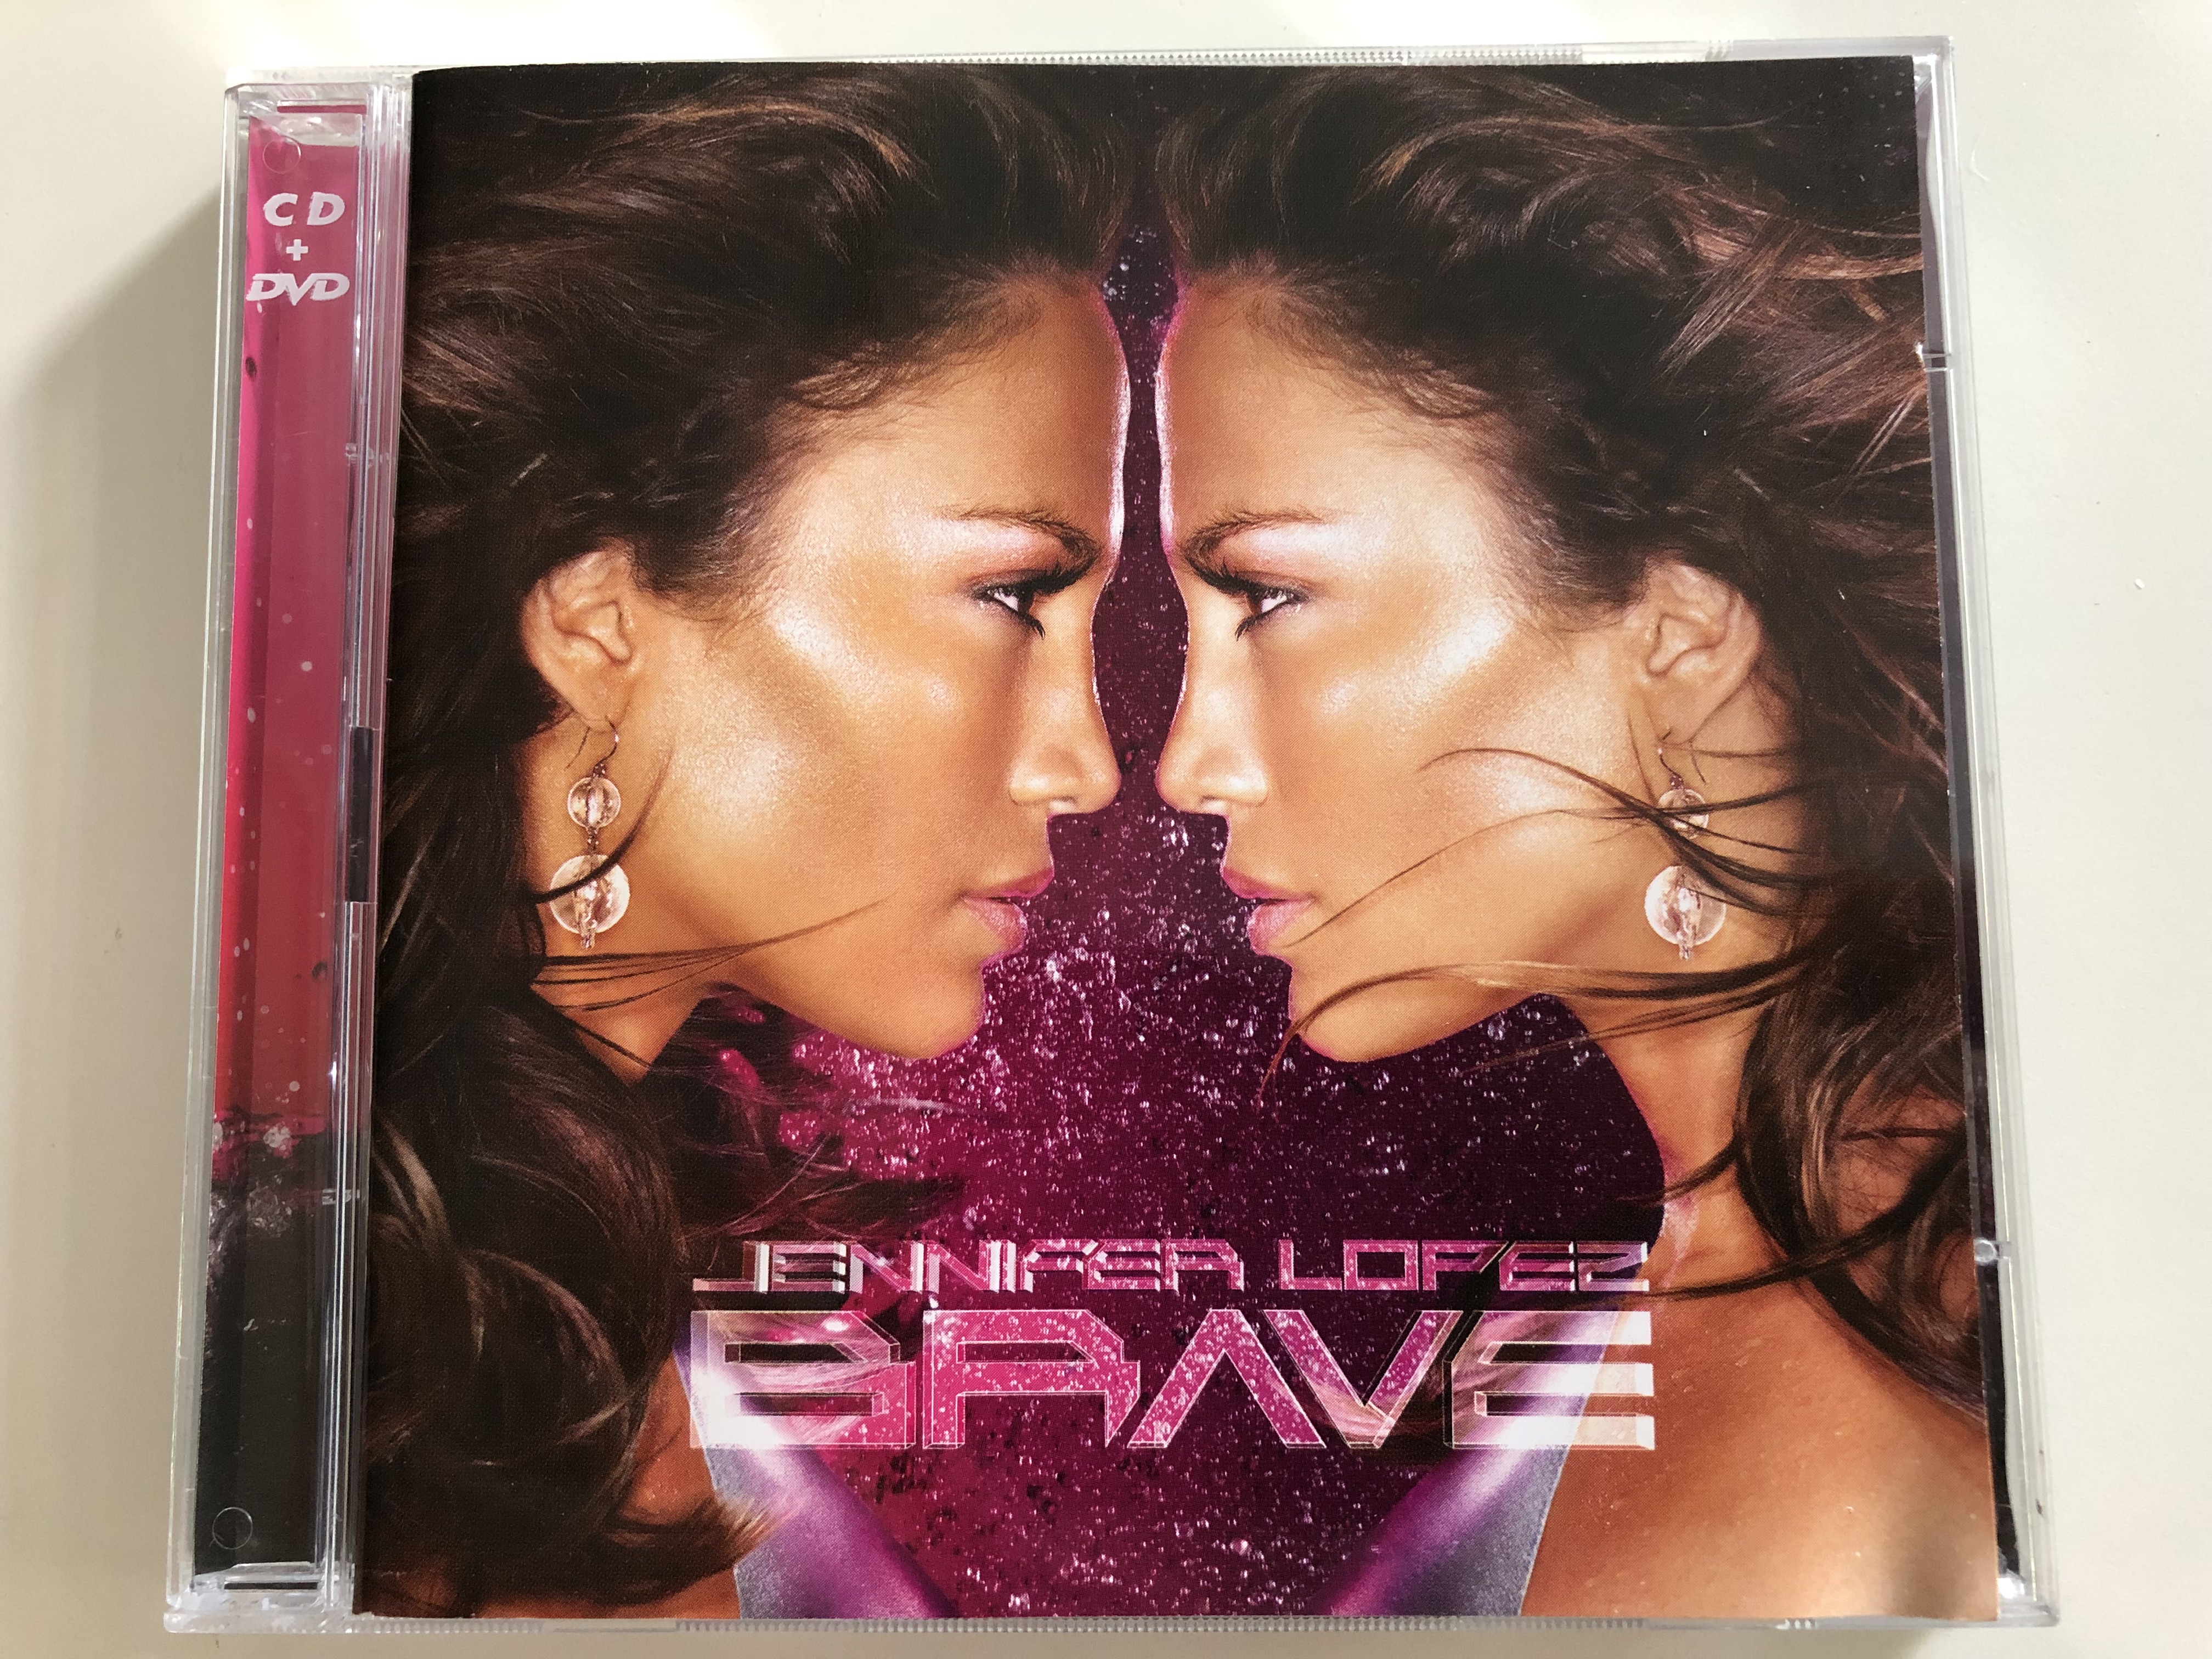 jennifer-lopez-brave-stay-together-do-it-well-the-way-it-is-cd-dvd-2007-sony-bmg-1-.jpg